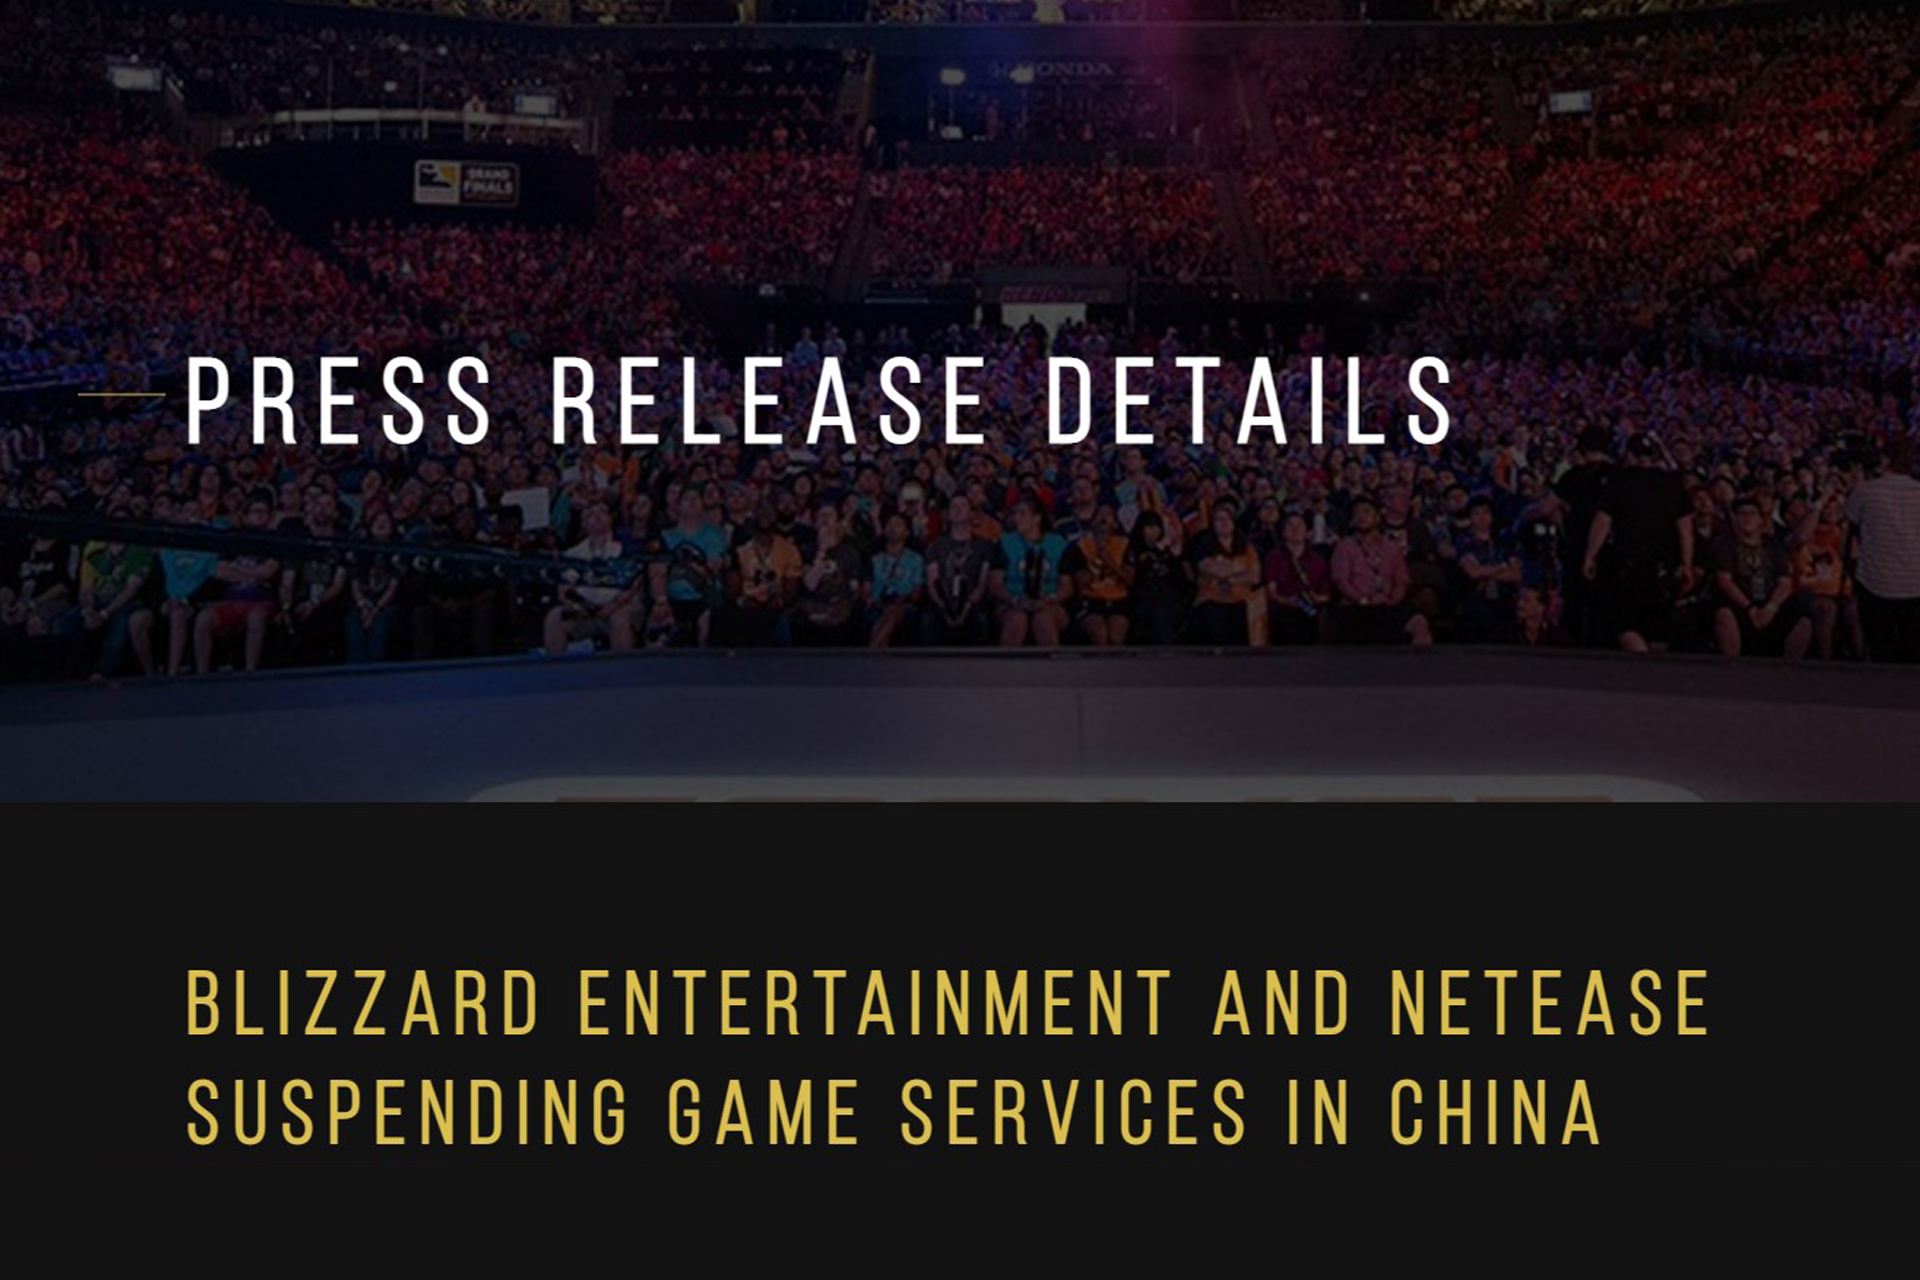 WoW and Many Other Blizzard Games go Offline in China today